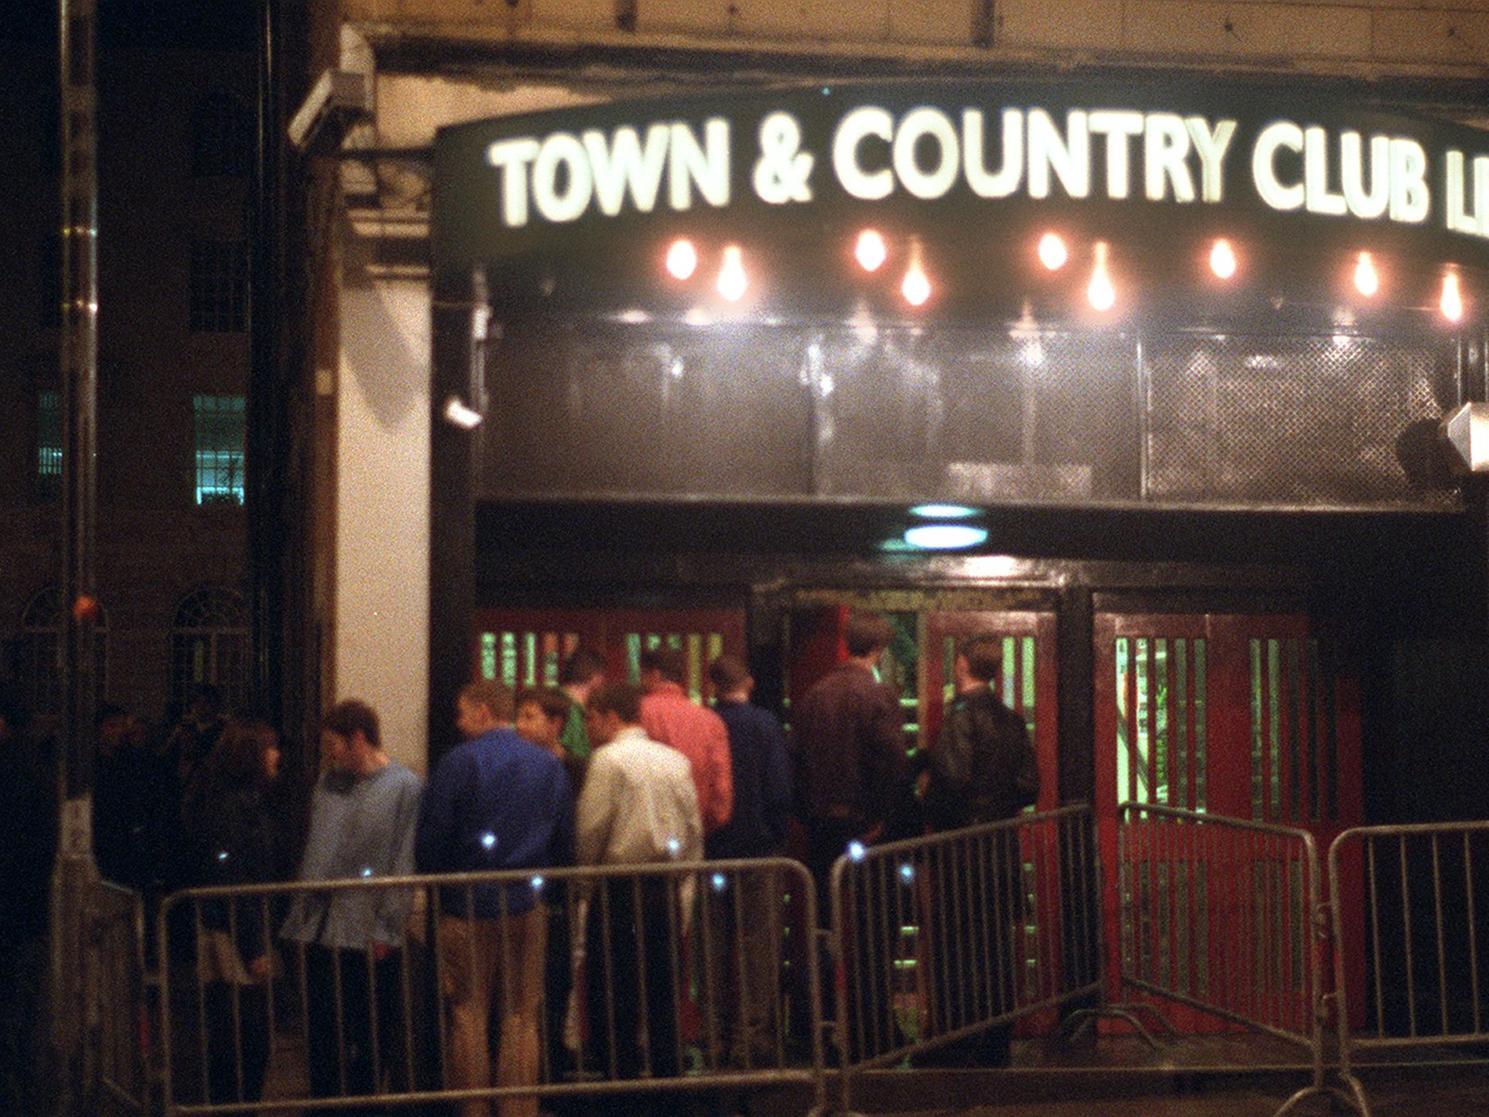 The much-missed T&C was a high-calibre hot spot for live music and club nights, and was home to the Love Train night.